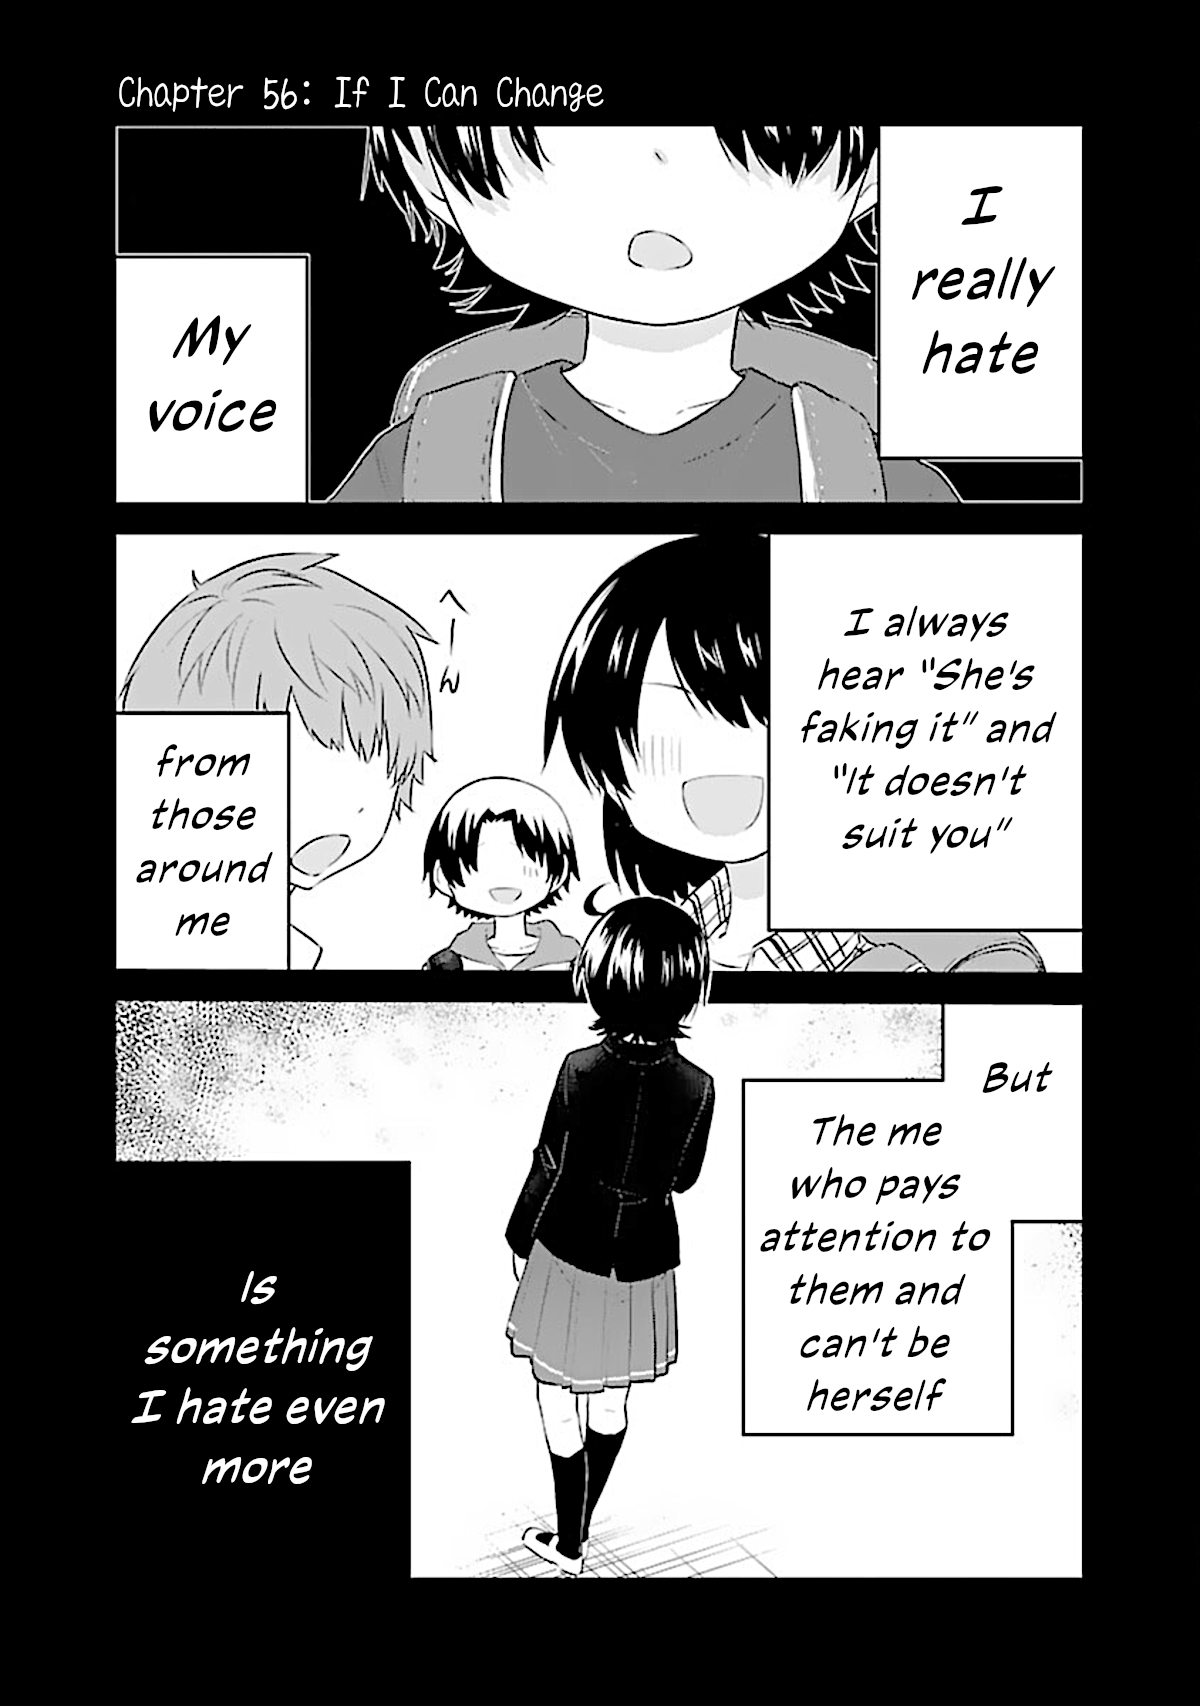 The Mute Girl And Her New Friend (Serialization) Vol.5 Chapter 56: If I Can Change - Picture 1